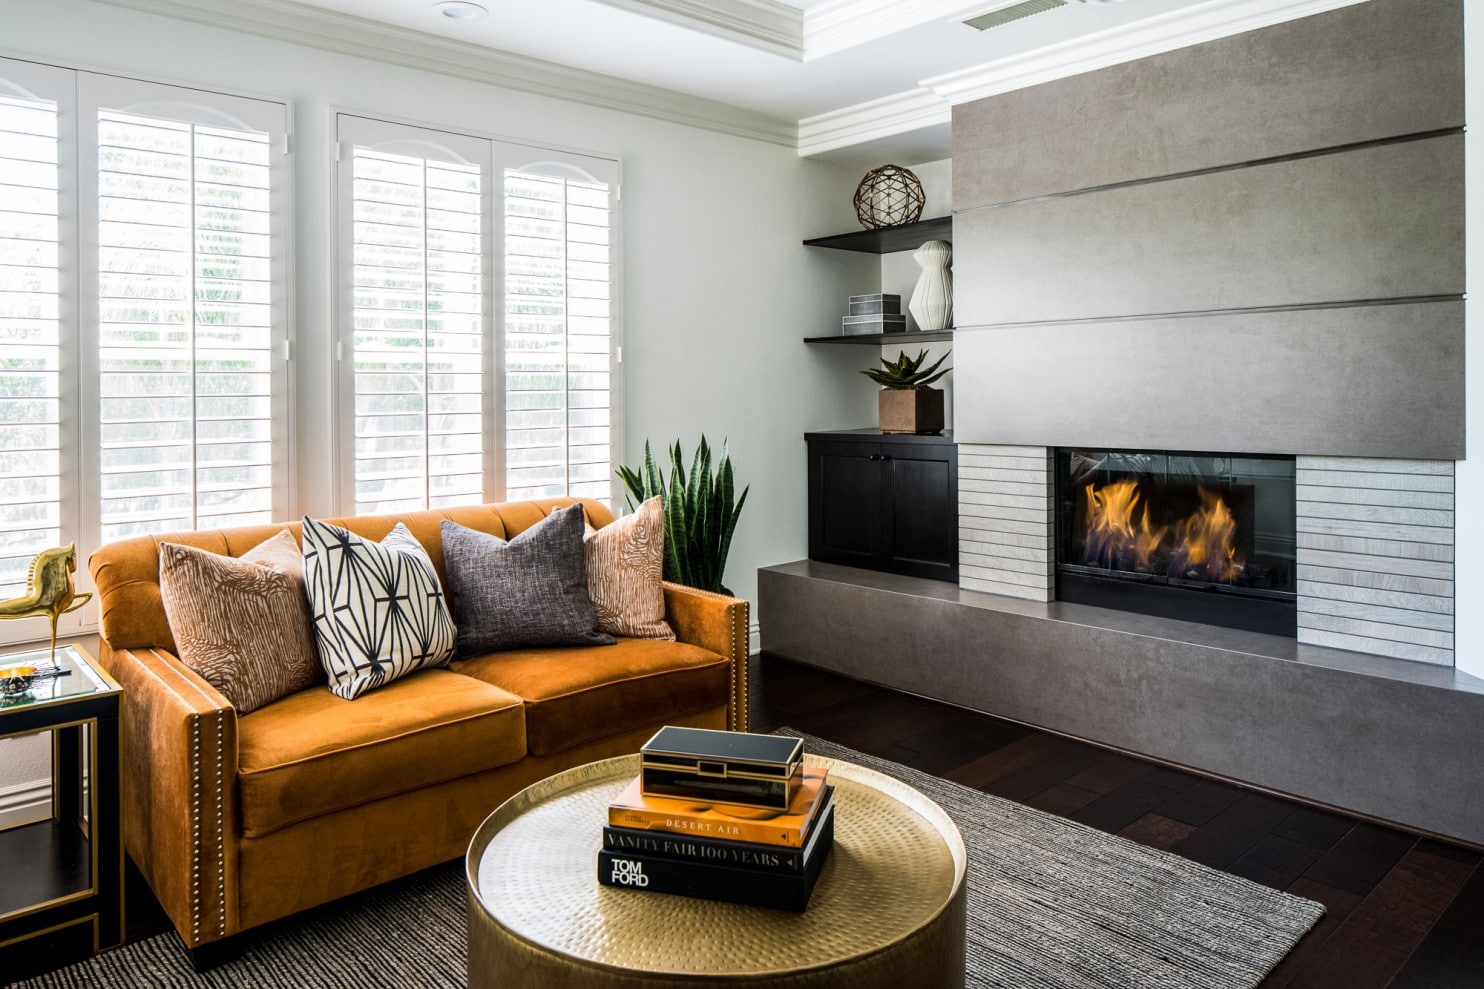 Image of warm, earth tones in living room